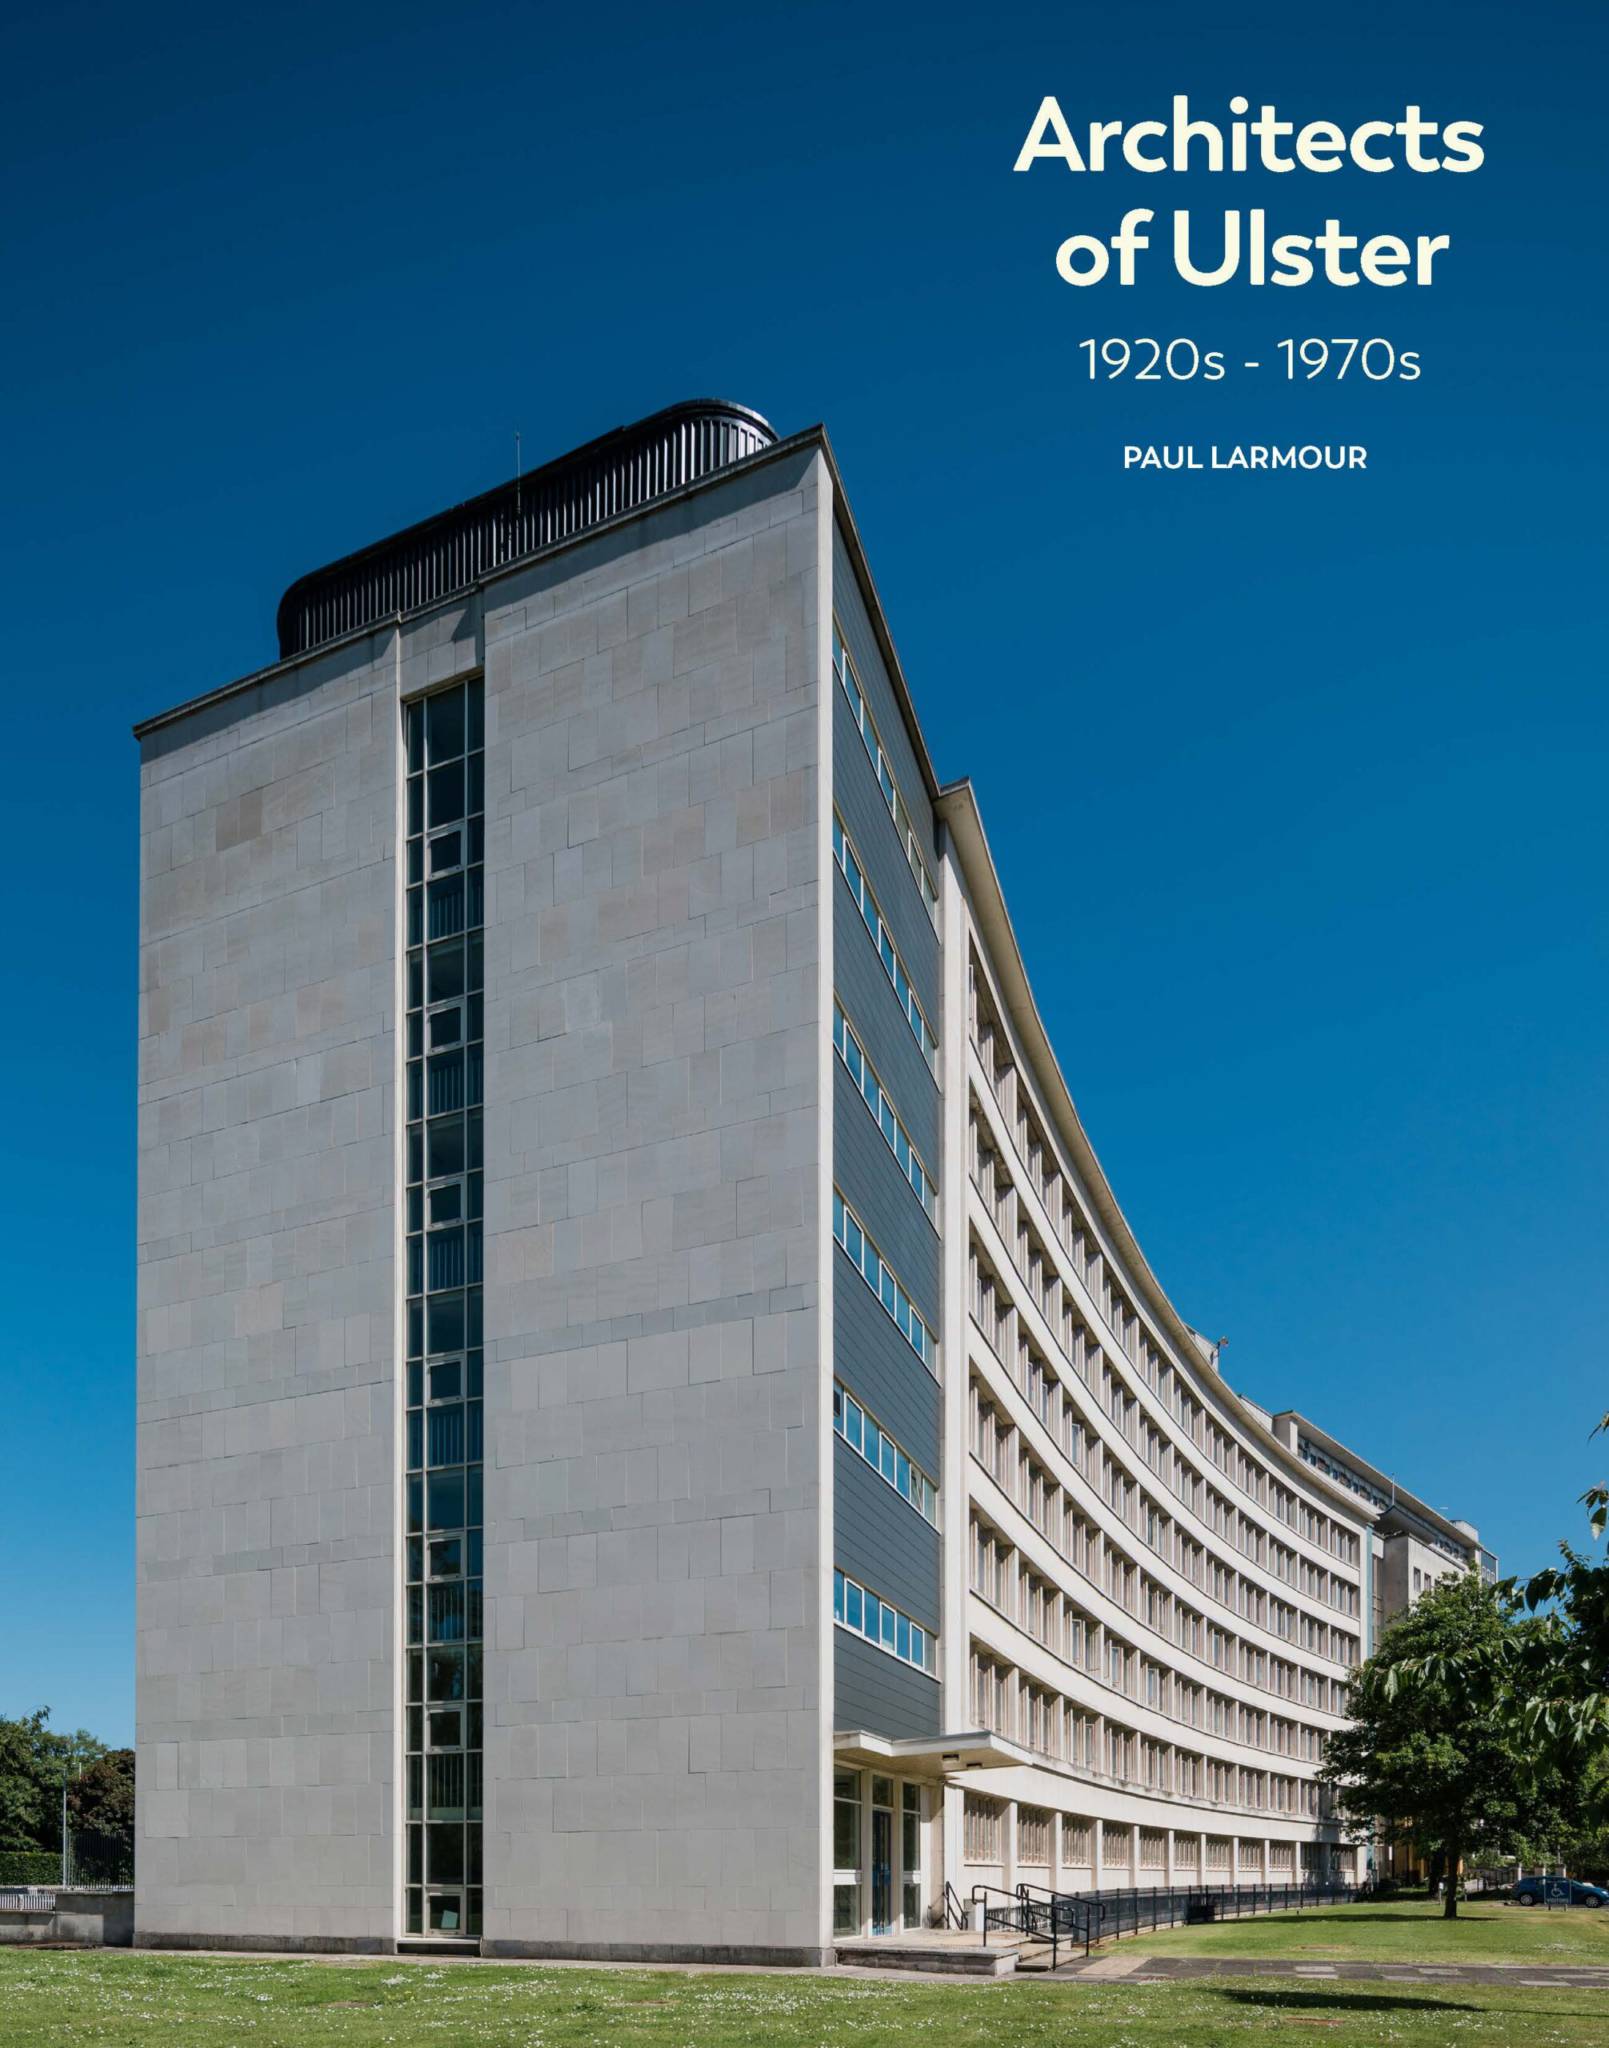 LECTURE: Architects of Ulster 1920s-1970s by Dr Paul Larmour